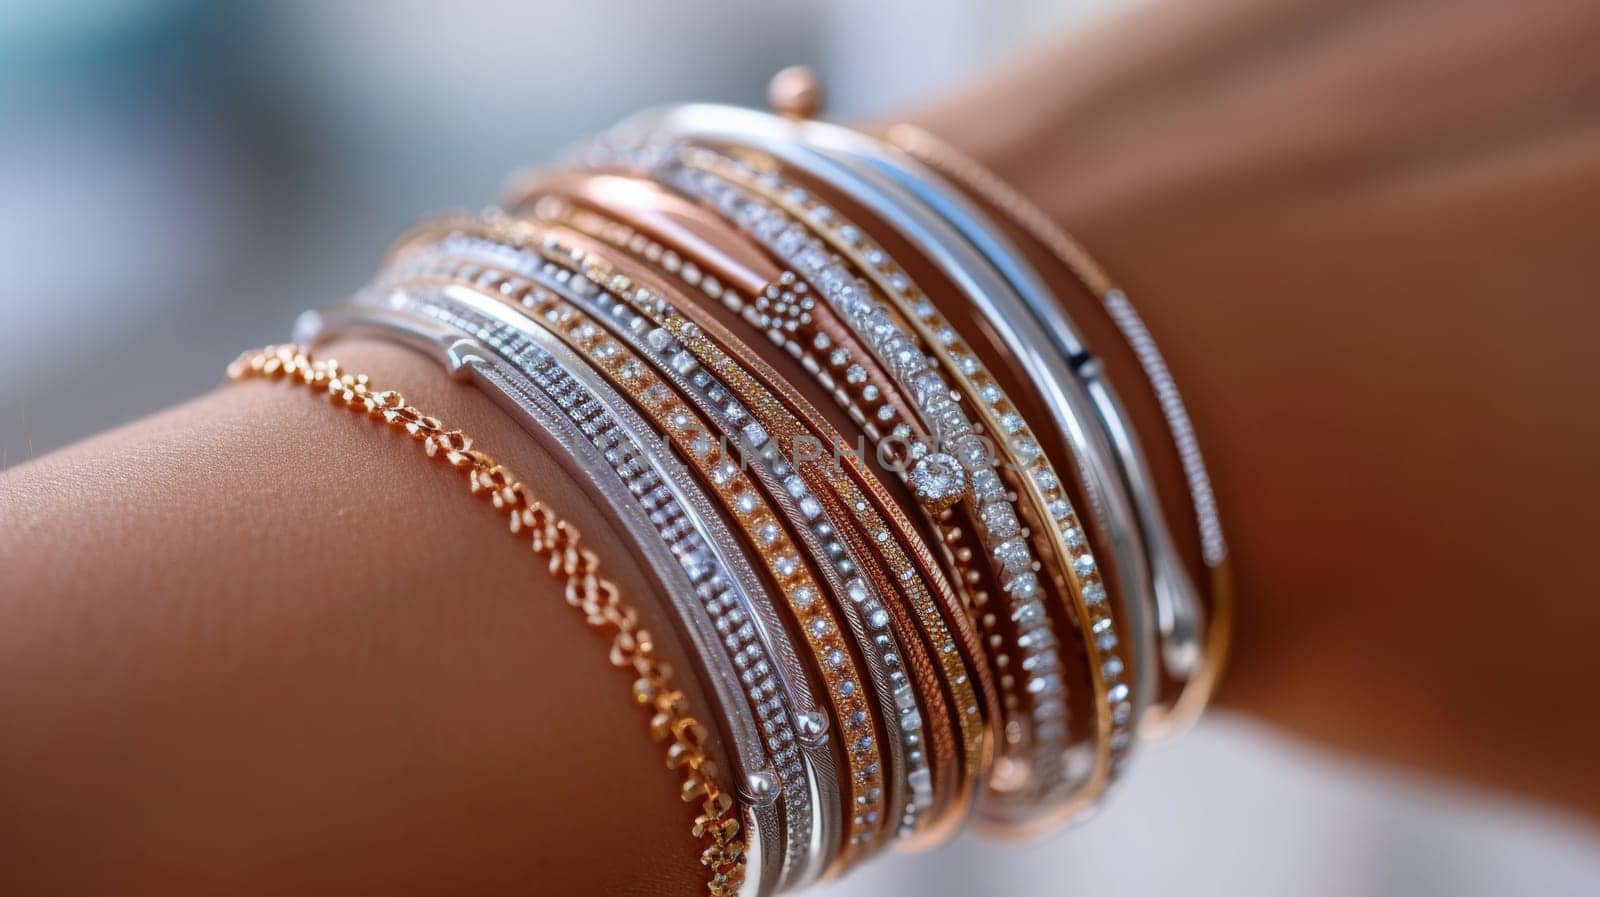 A woman's arm with multiple bangles on it